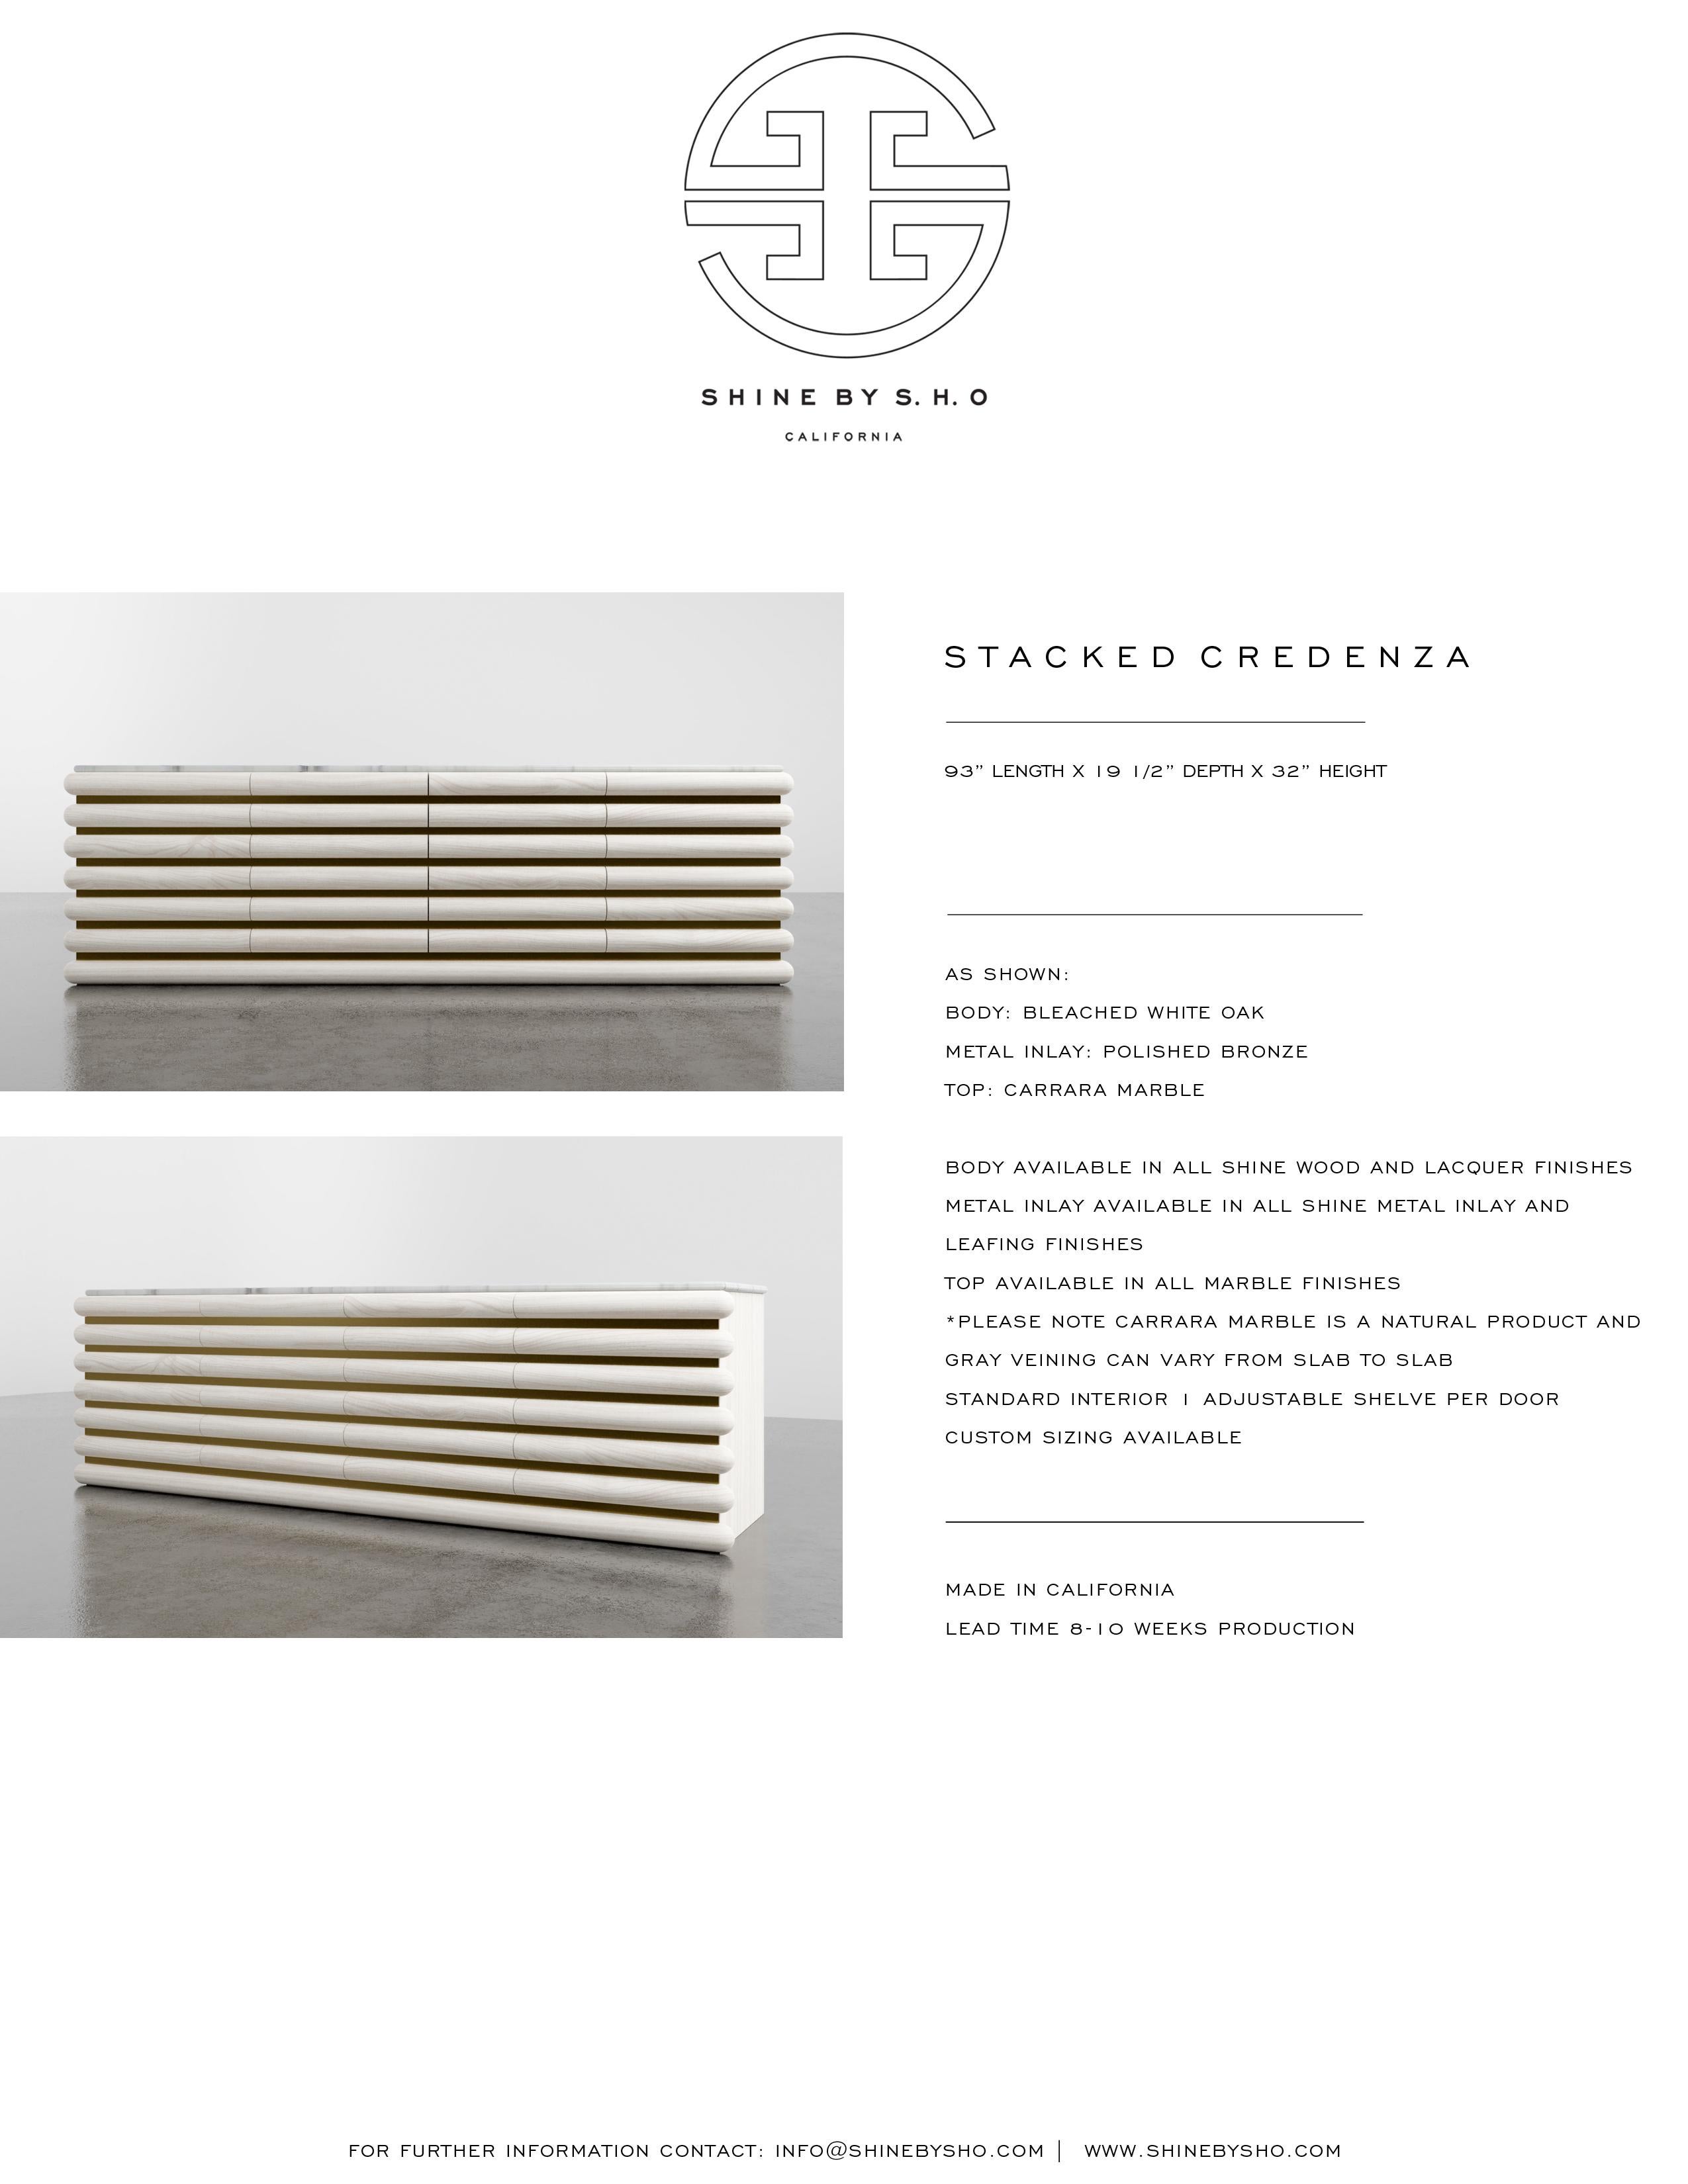 Contemporary STACKED CREDENZA - Modern Wood Detail with Metal Inlay and a Marble Top